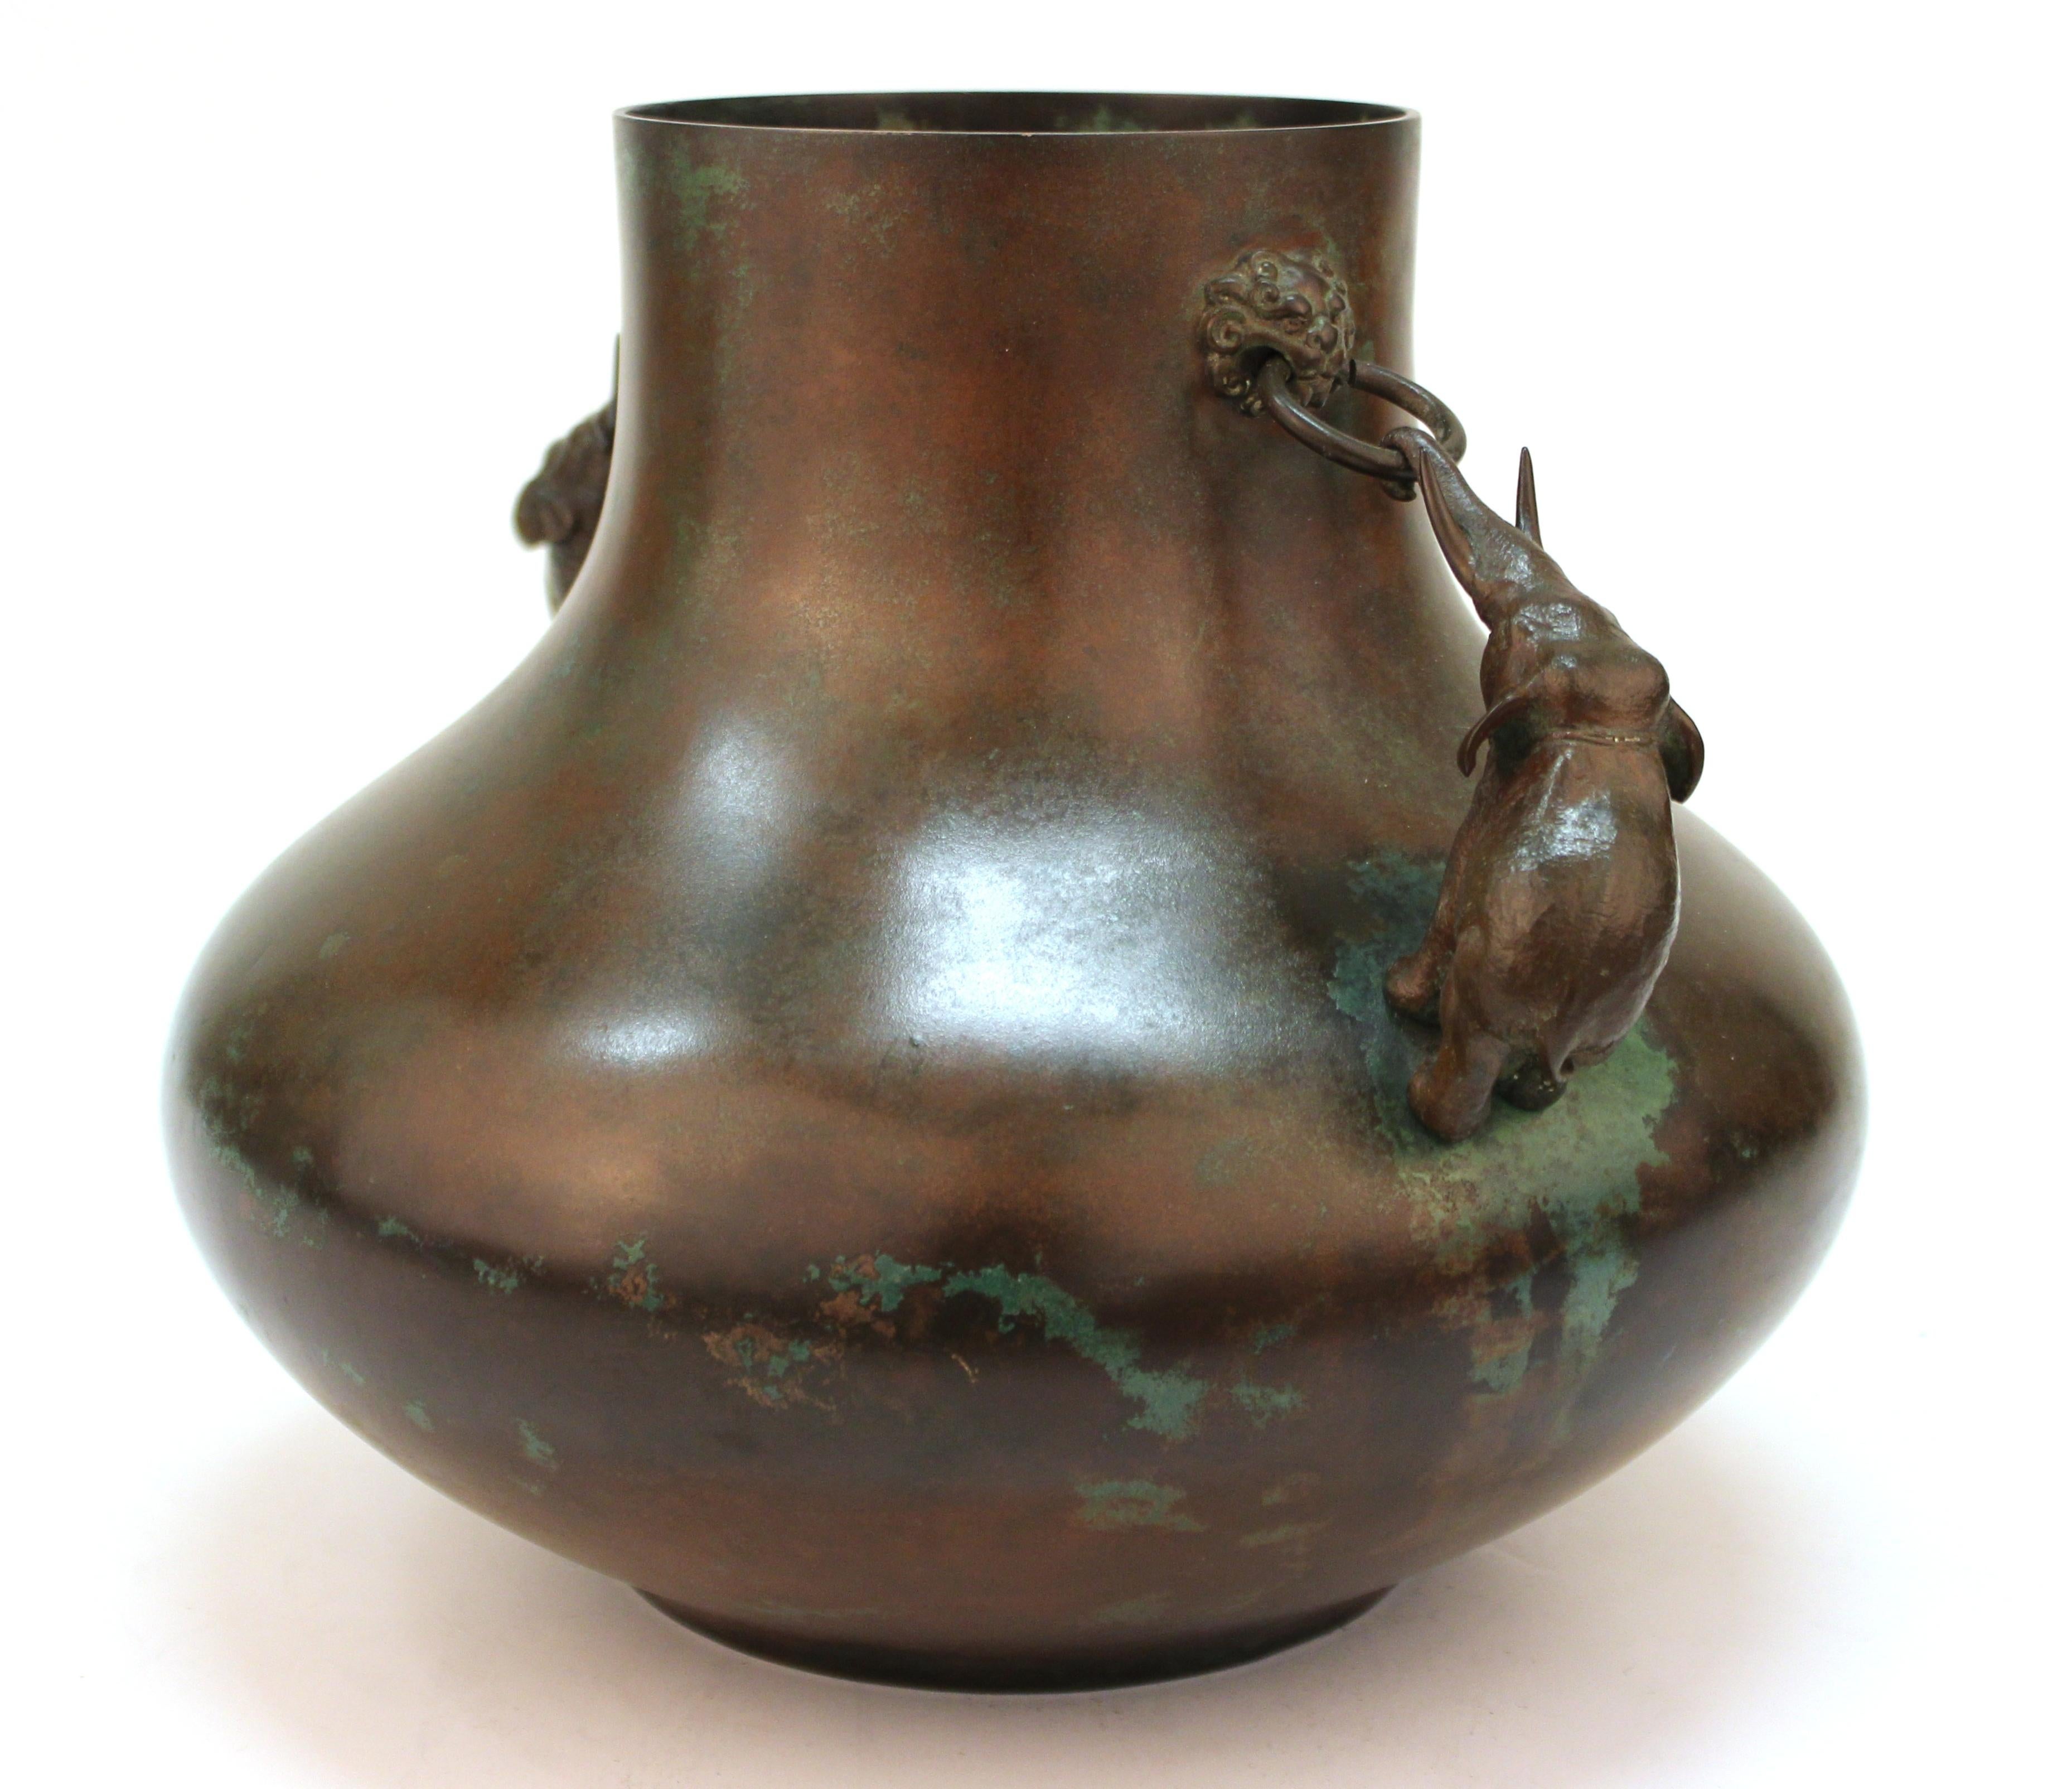 Japanese Meiji period bronze vase with two sculpted elephants pulling on the ring handles with their trunks. The piece has a desirable natural green patina and a makers stamp on the bottom. In great vintage condition.